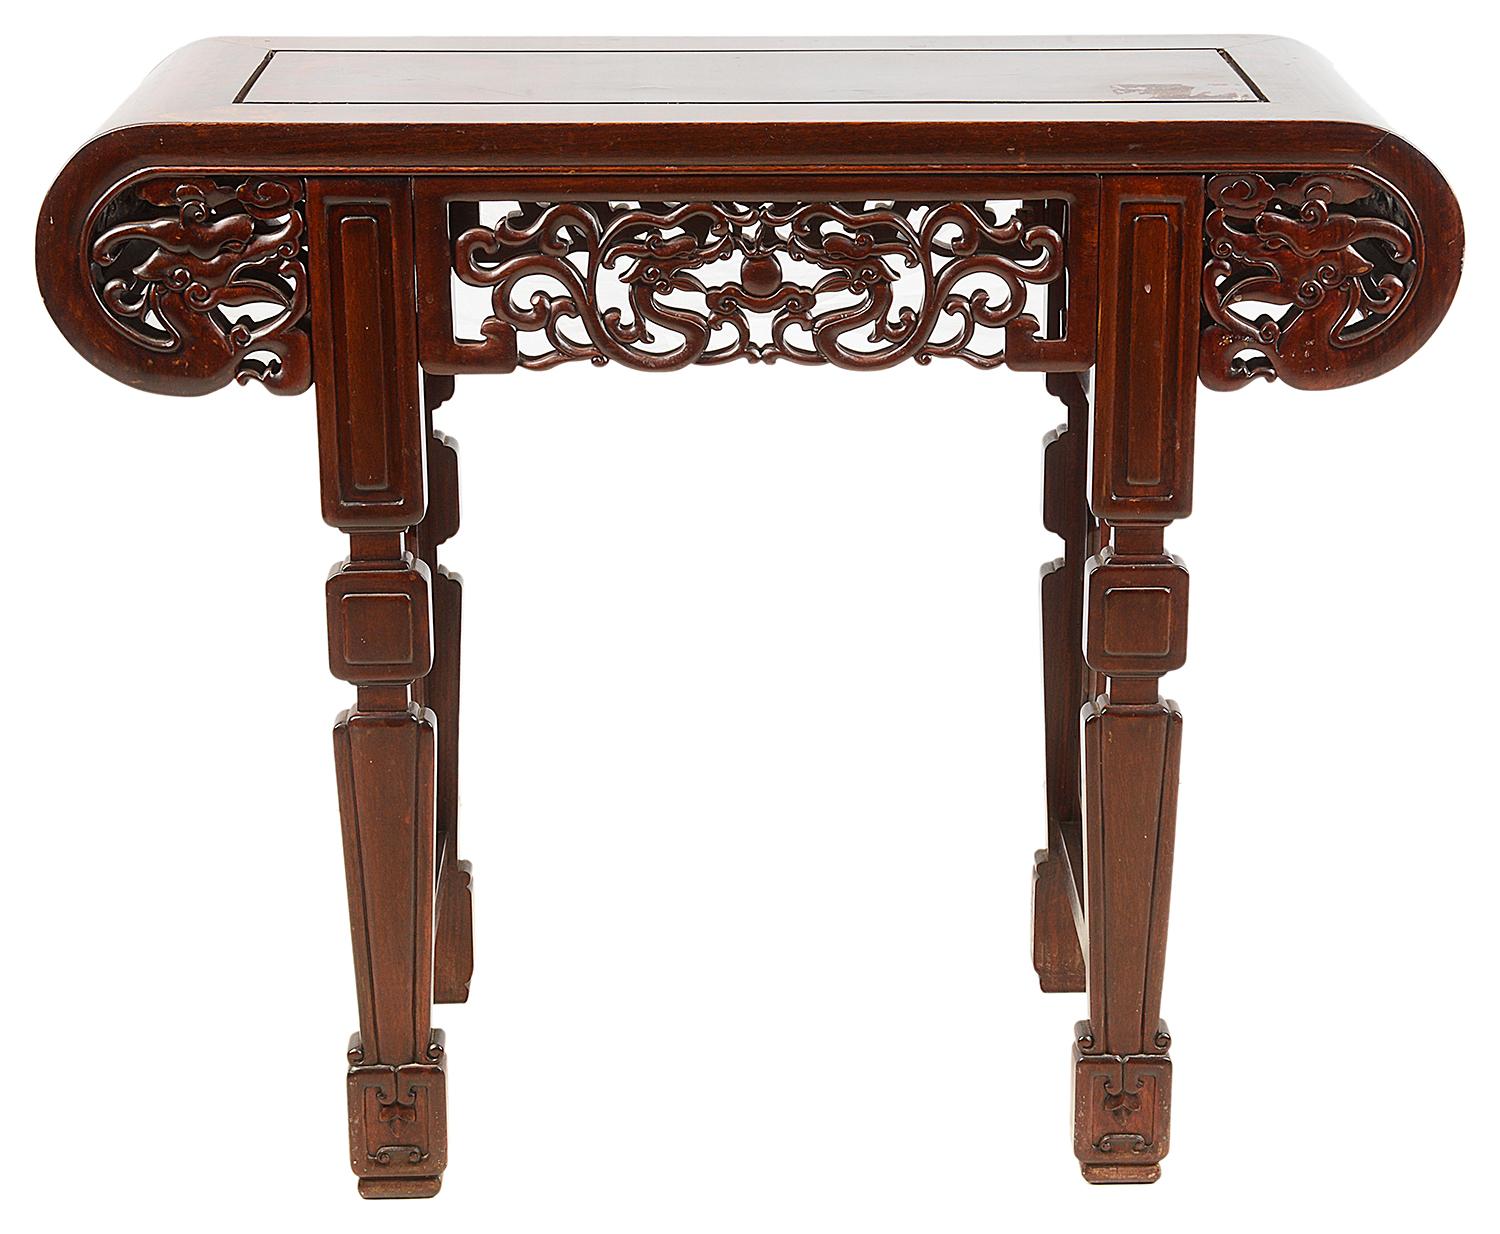 A good quality late 19th century Chinese hardwood alter table. Having carved scrolling decoration with mythical dragons to the frieze, raised on four tapering legs with raised panels within.